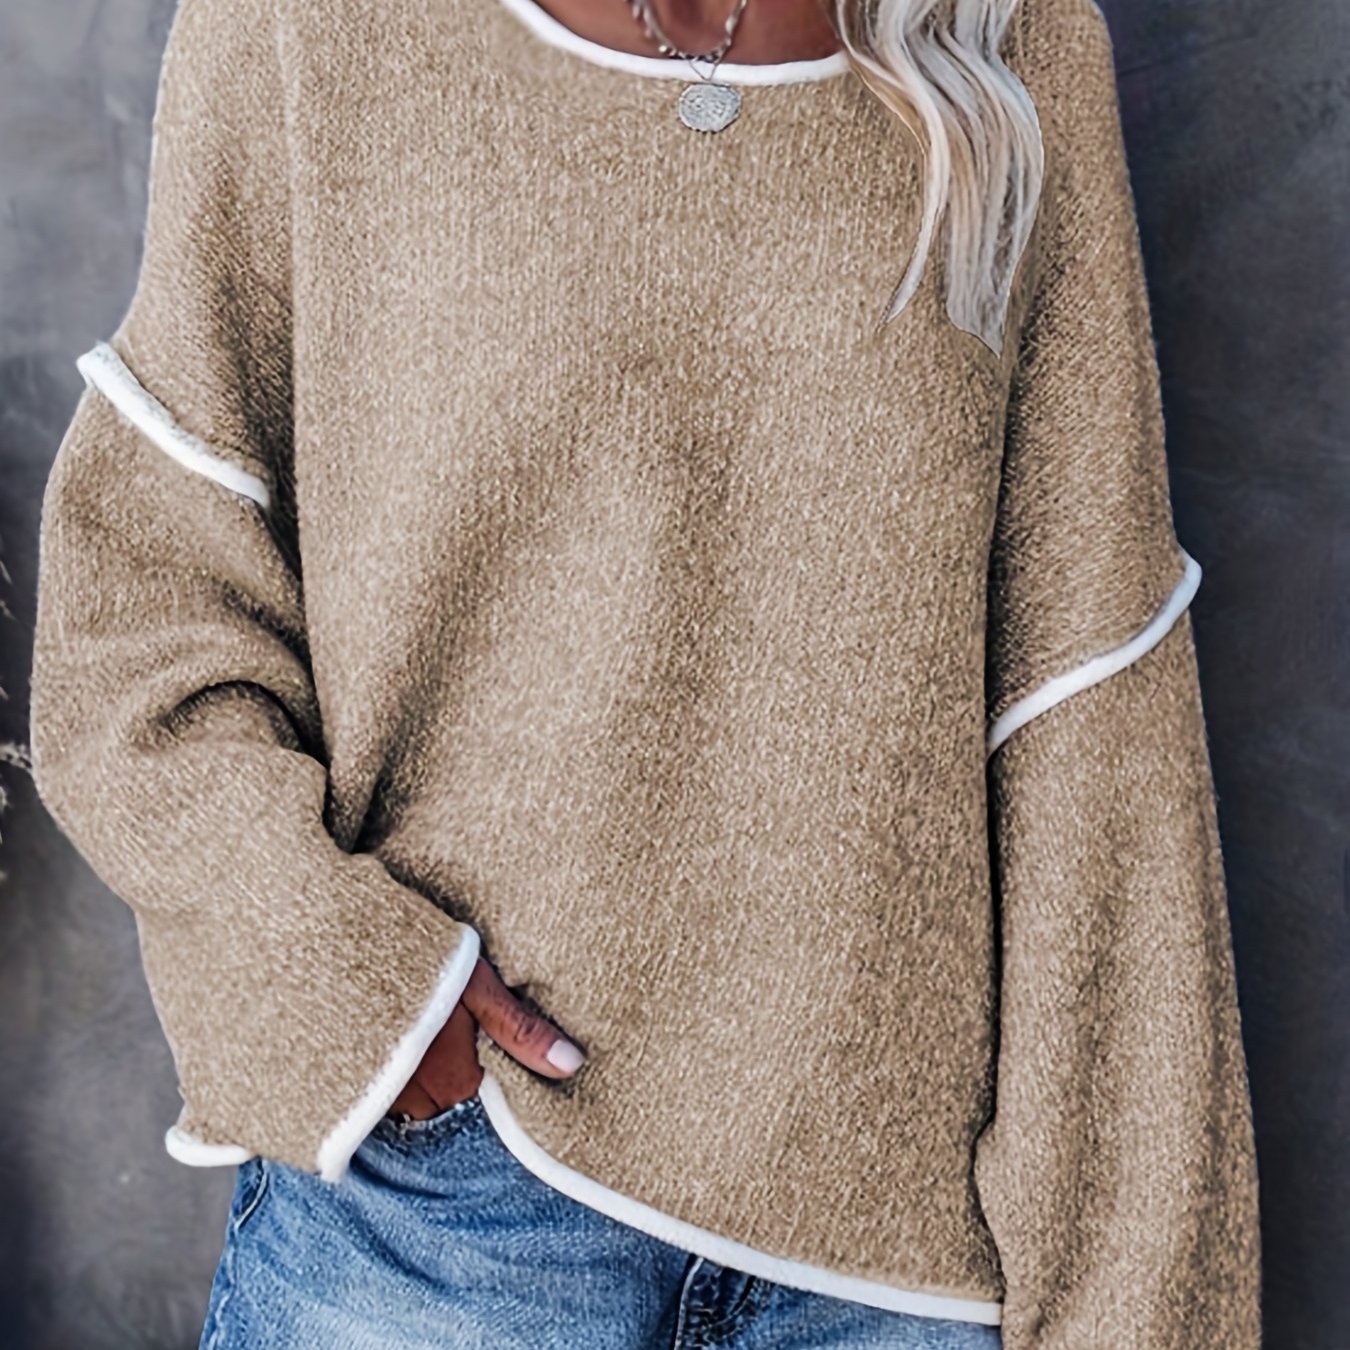 Plus Size Casual Sweater, Women's Plus Solid Long Sleeve Round Neck Slight Stretch Loose Sweater Tawny